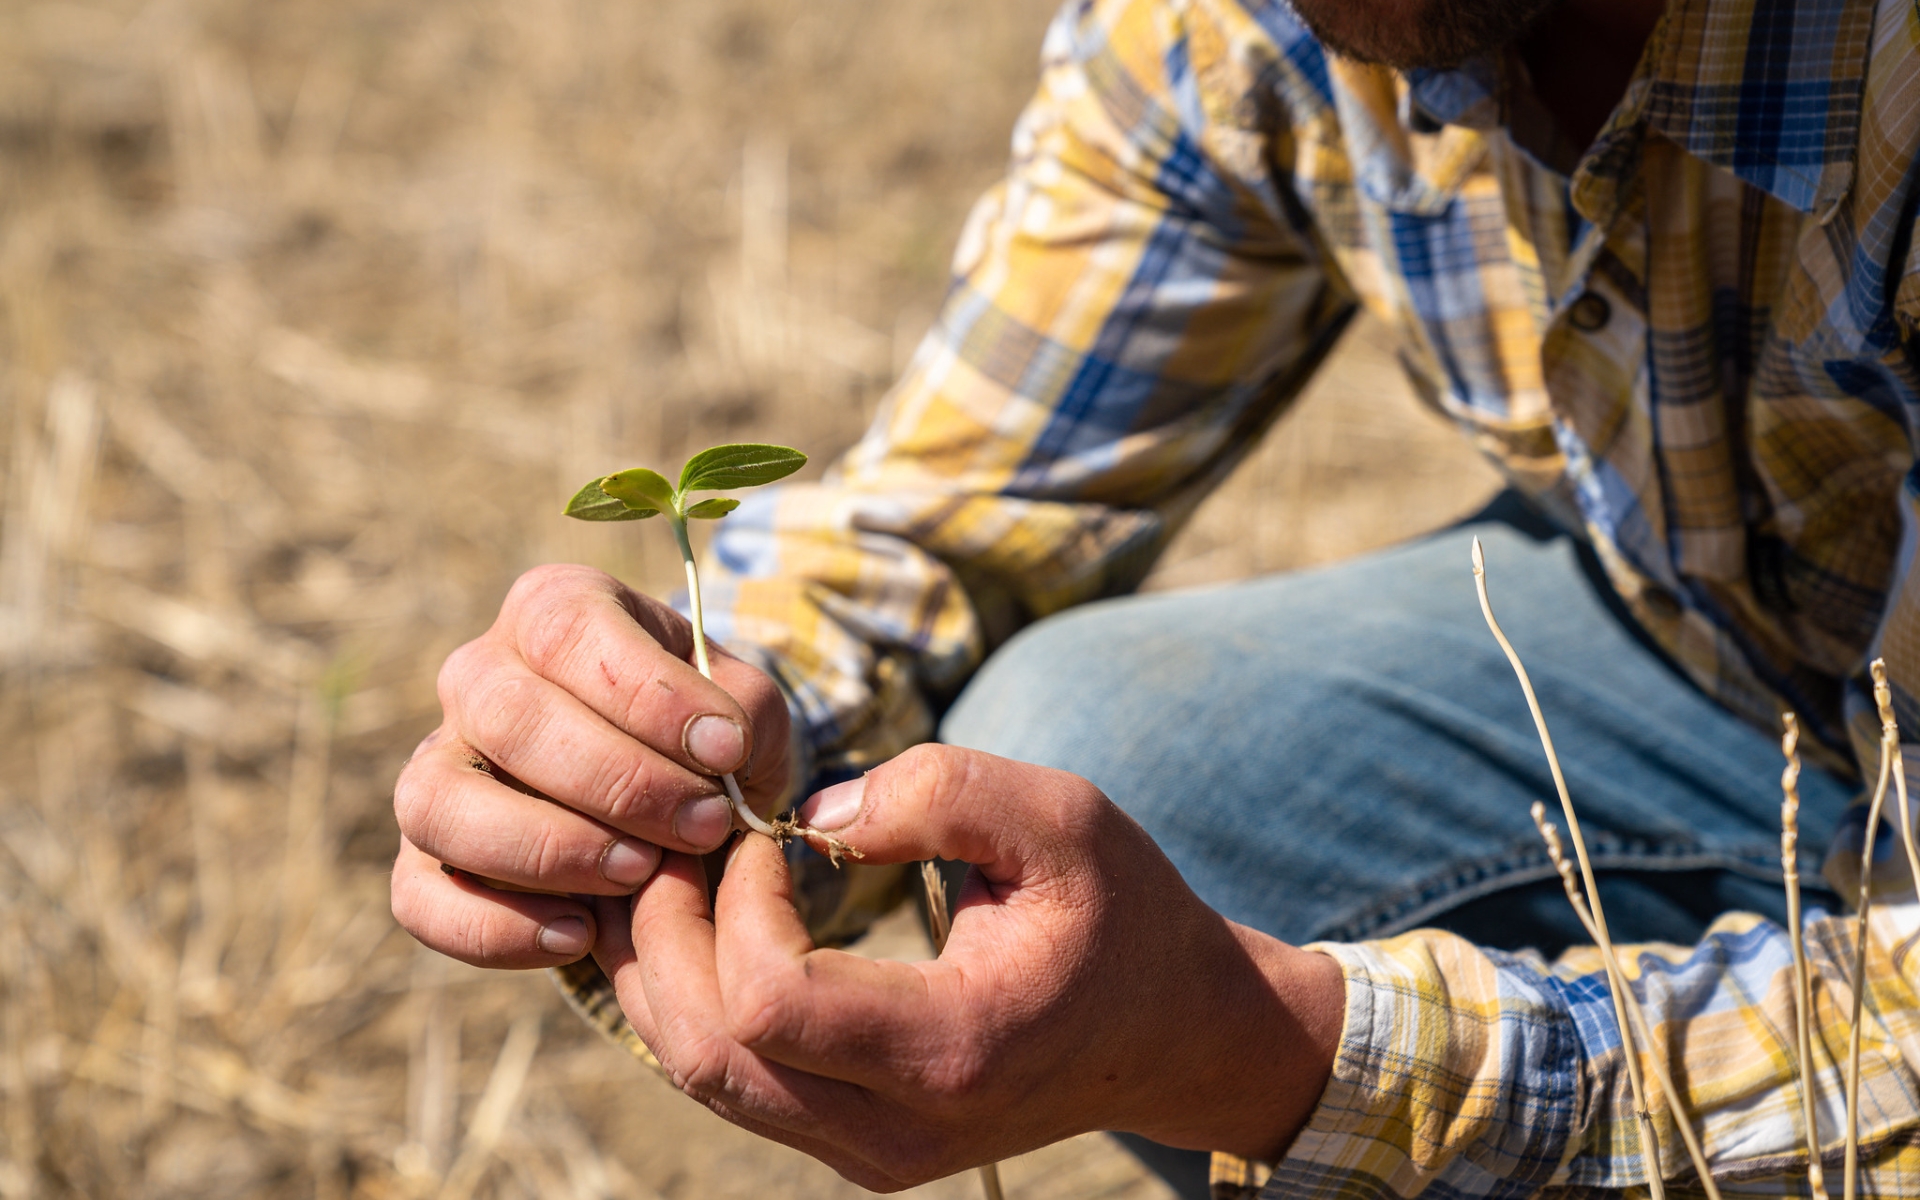 A pair of hands examining the roots of a small, green plant that has been pulled from an agricultural field.